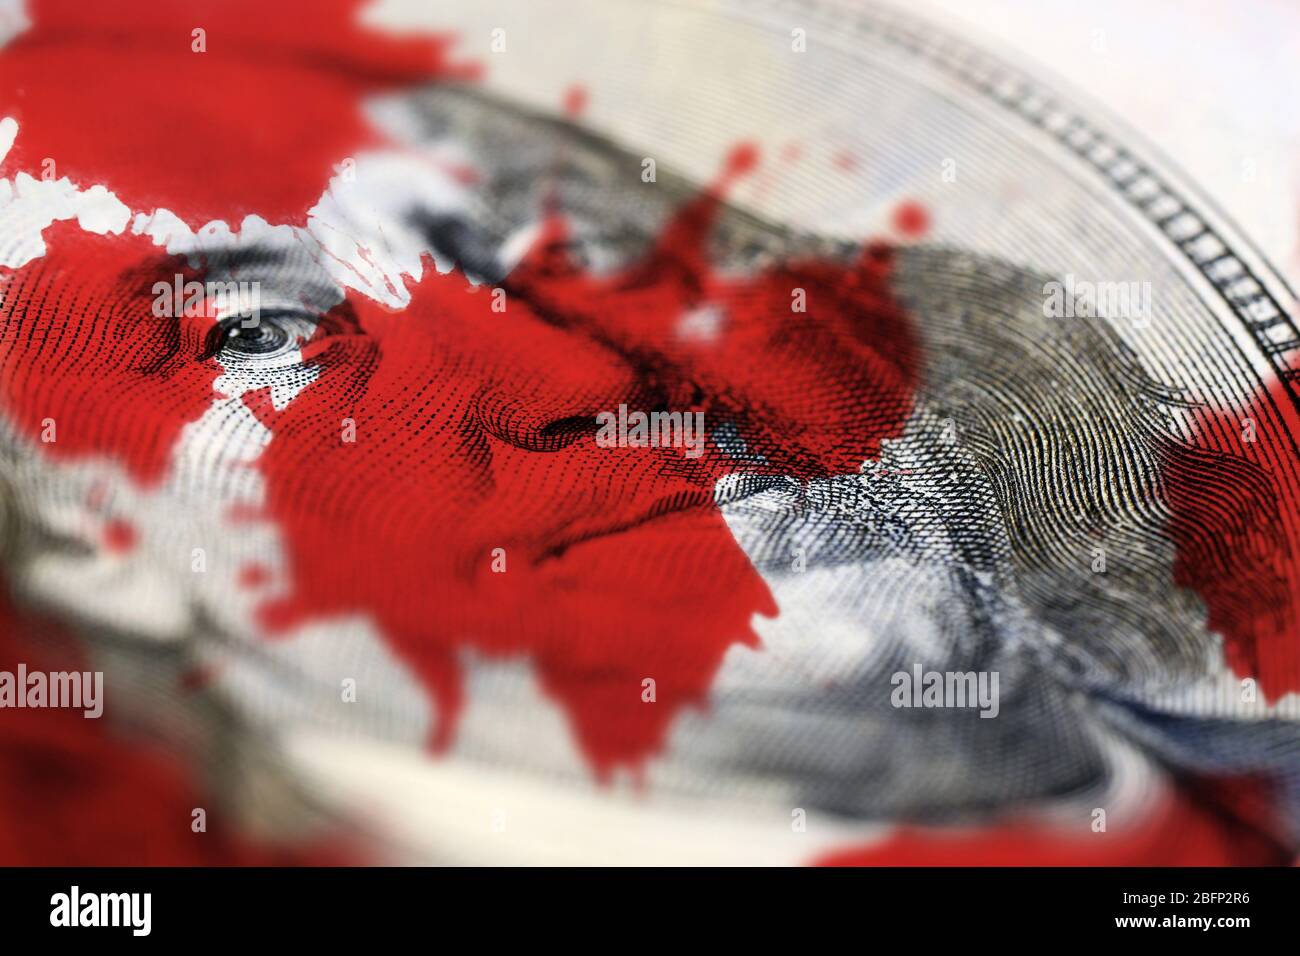 Dollar face and blood splashes close-up Stock Photo